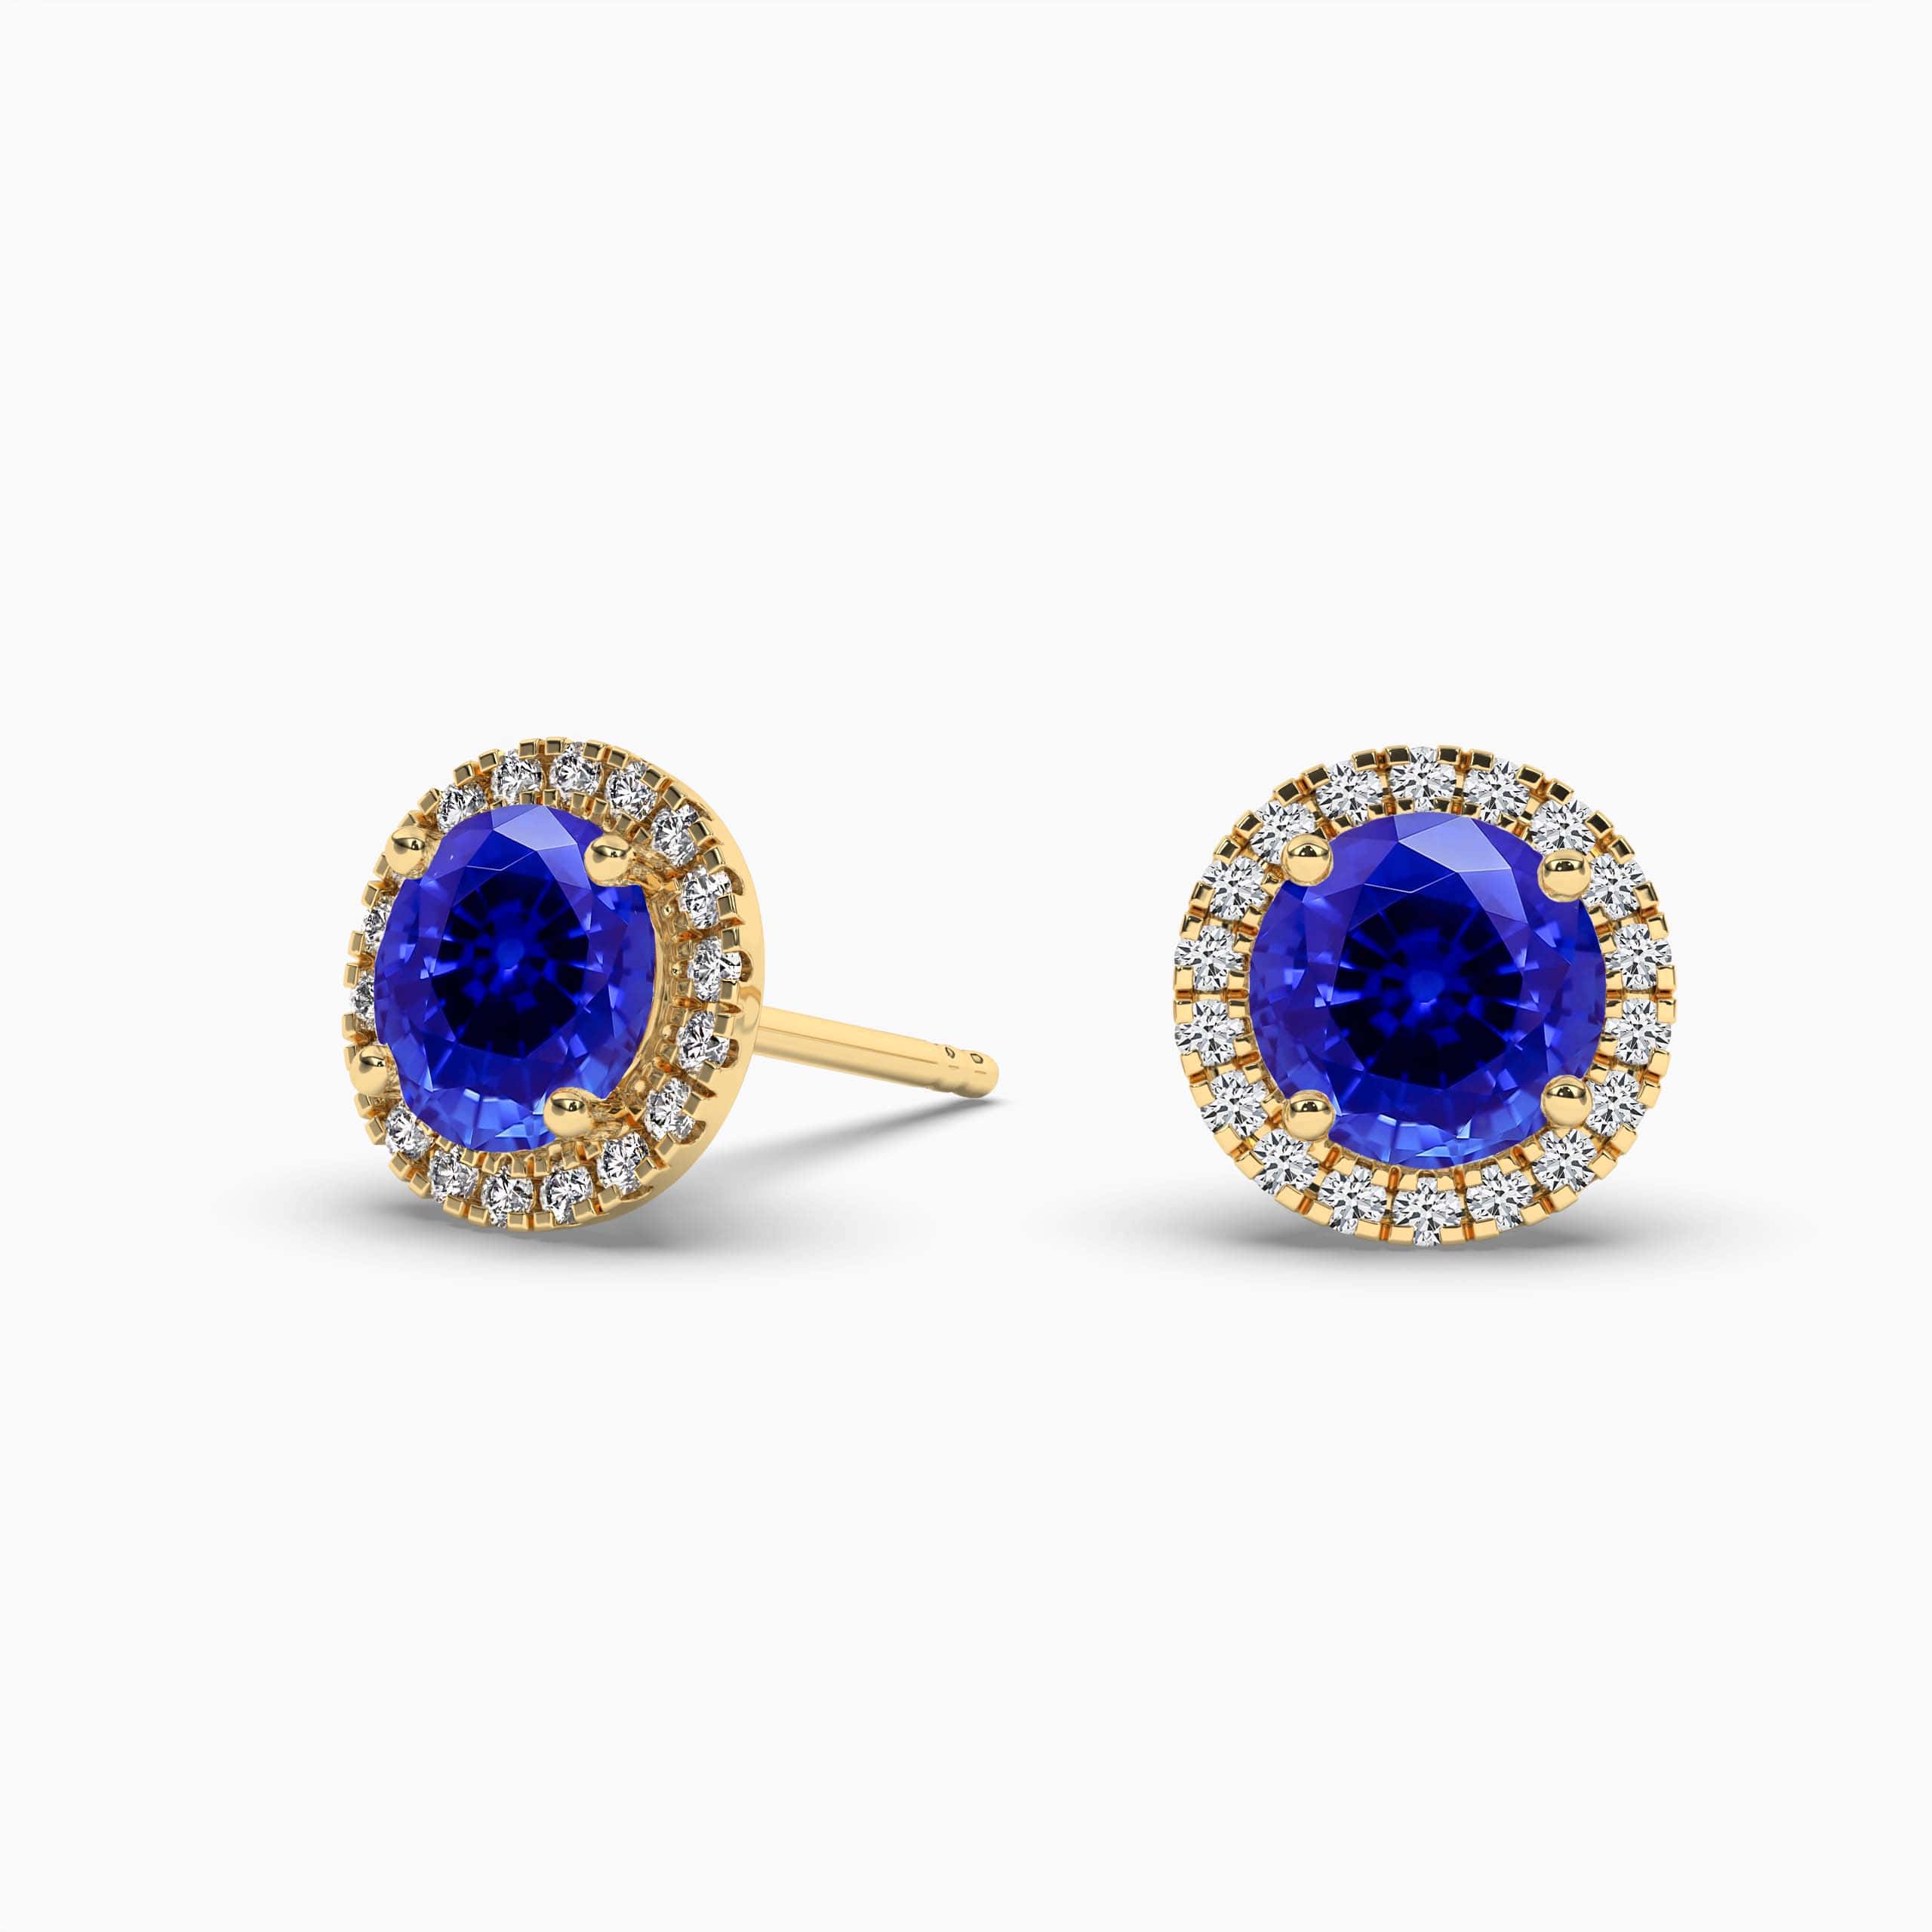 Round Blue Sapphire Gemstone Halo Earrings in Yellow Gold